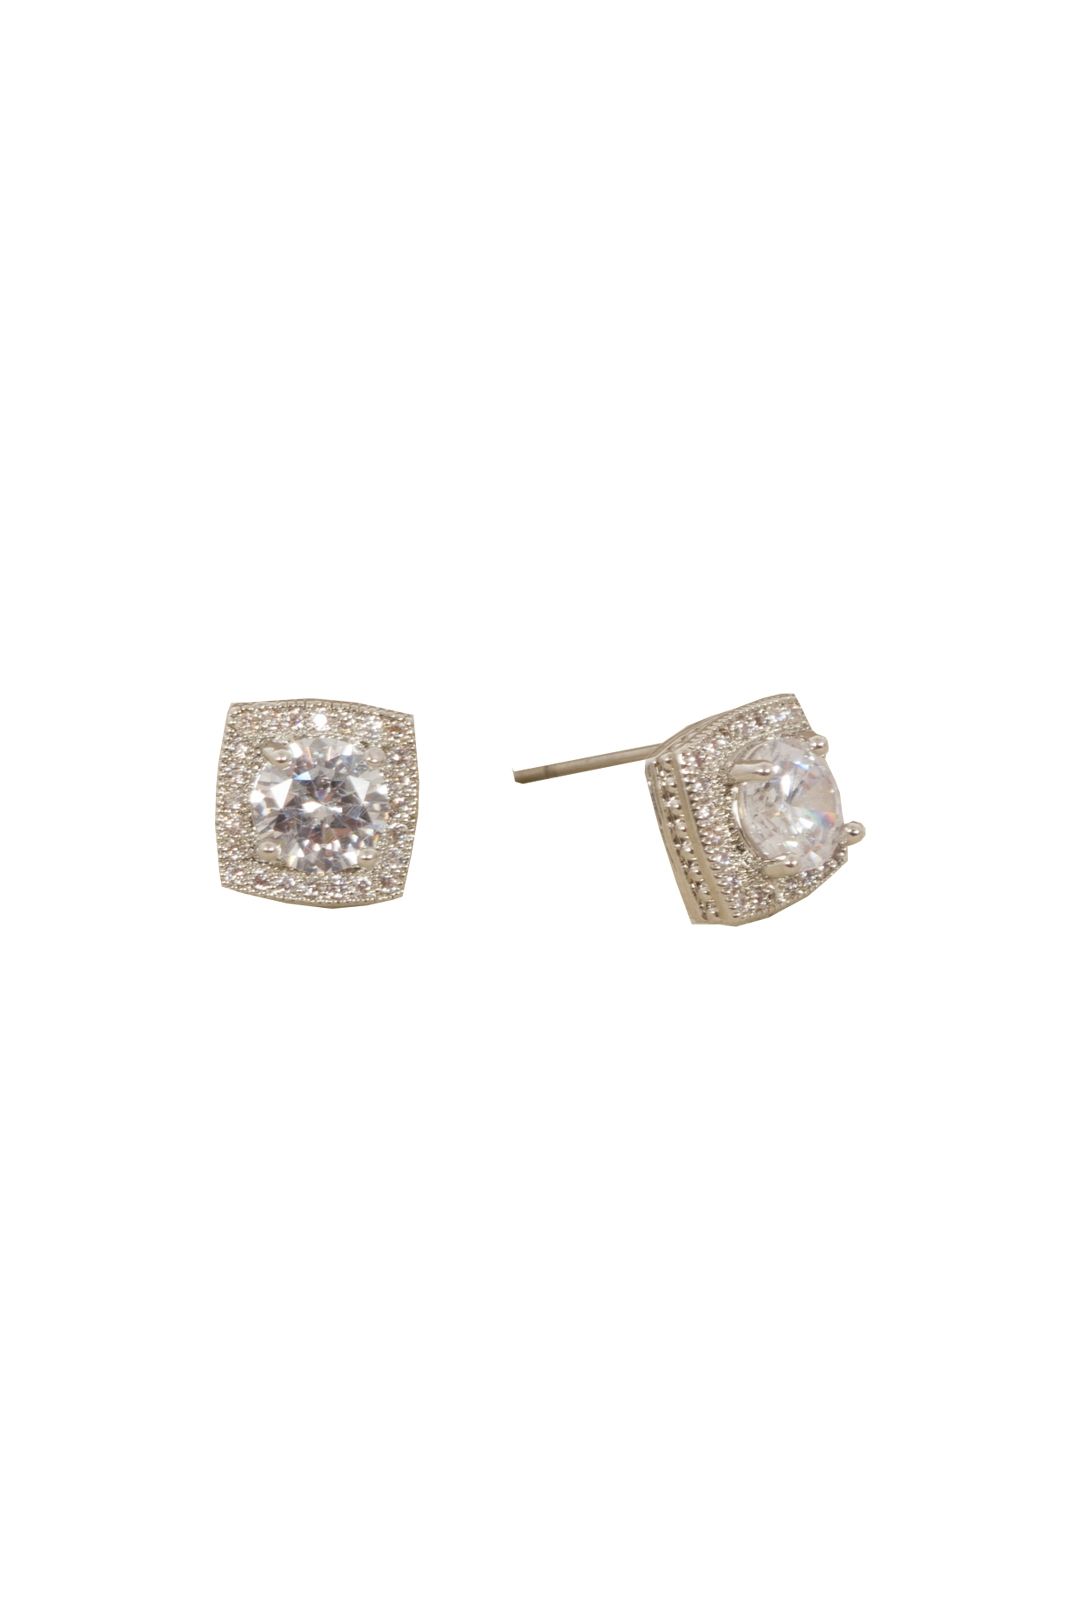 Adorne - Cubic Zirconia Mini Square Stud Earring - Silver - Front